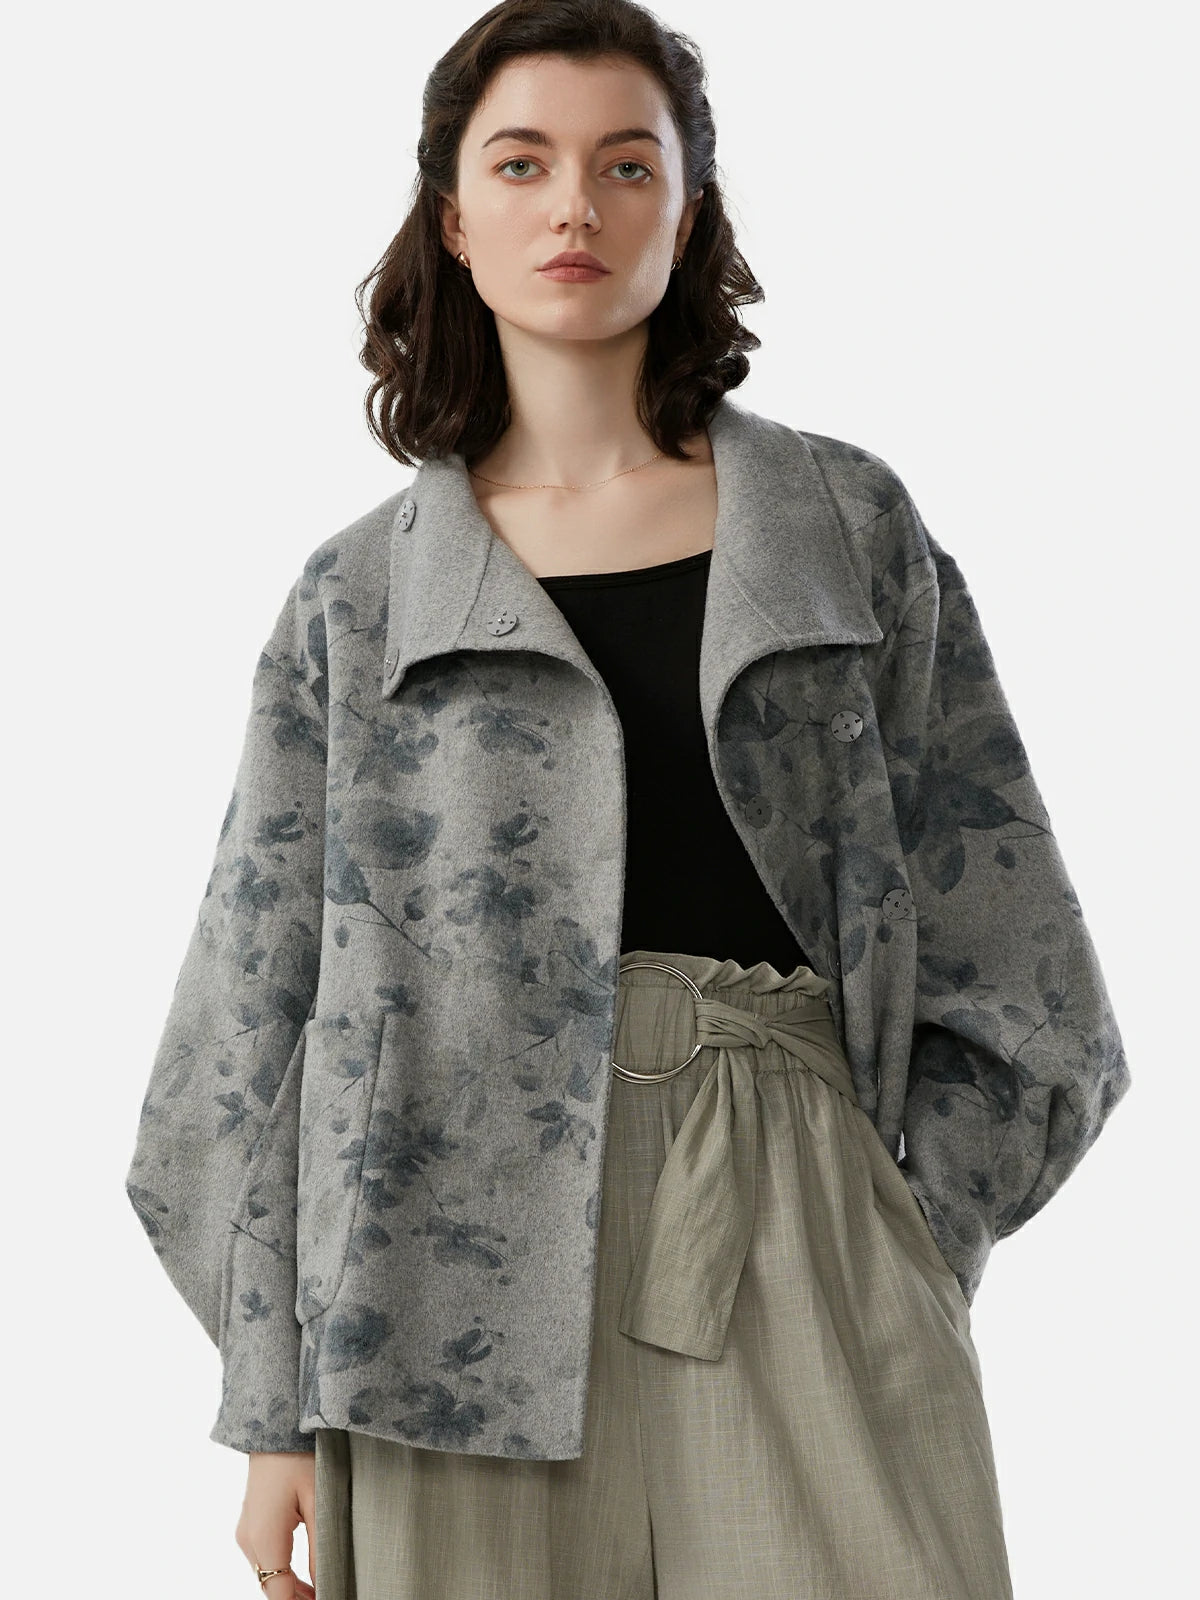 Grey printed pattern collared jacket with lantern sleeves and an accompanying belt, a fashionable women&#39;s wear